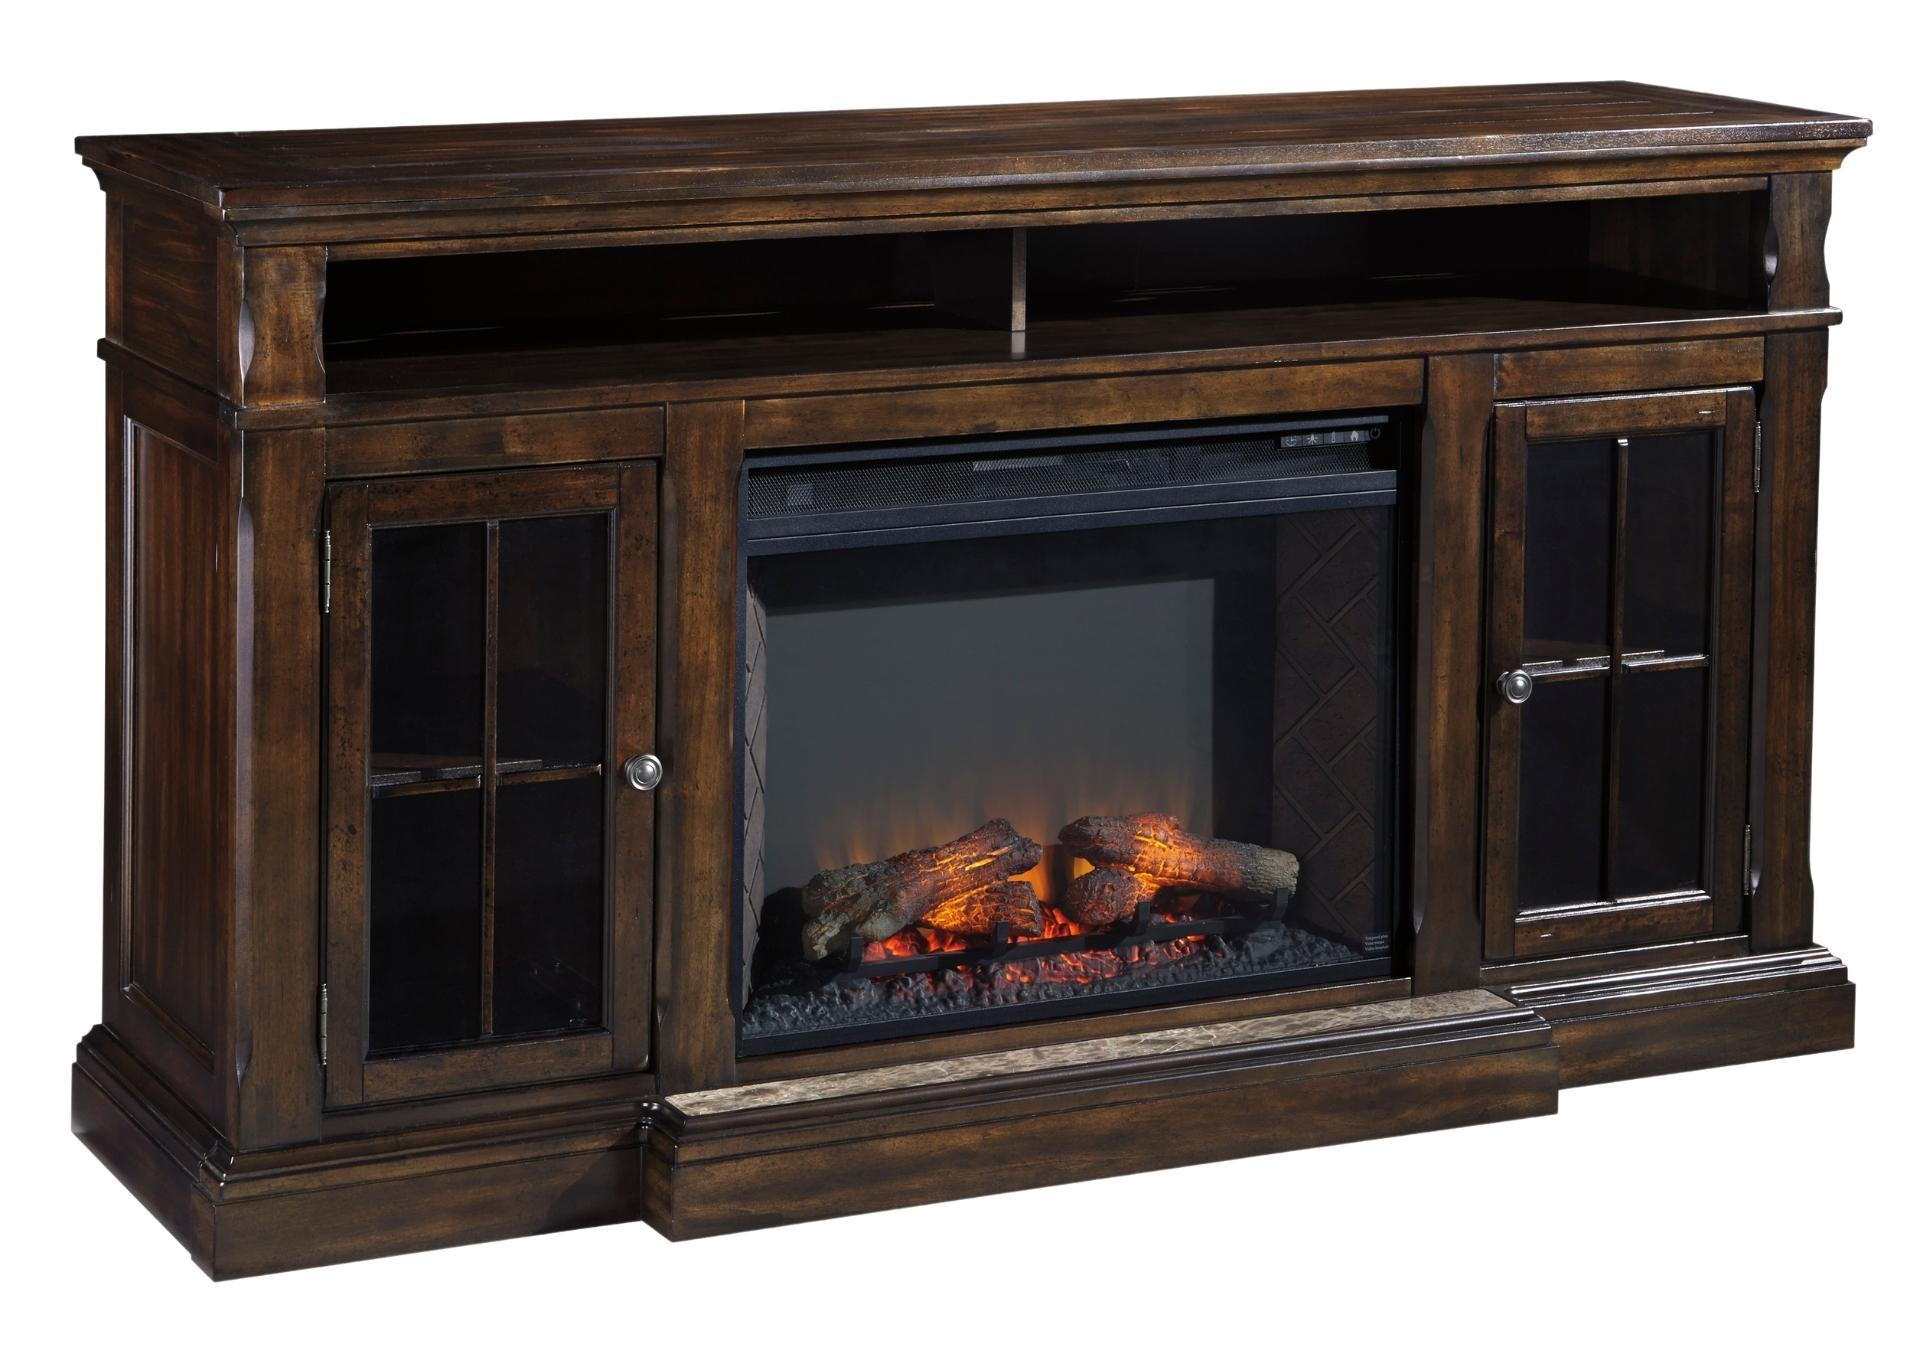 RODDINTON 72" TV STAND WITH FIREPLACE